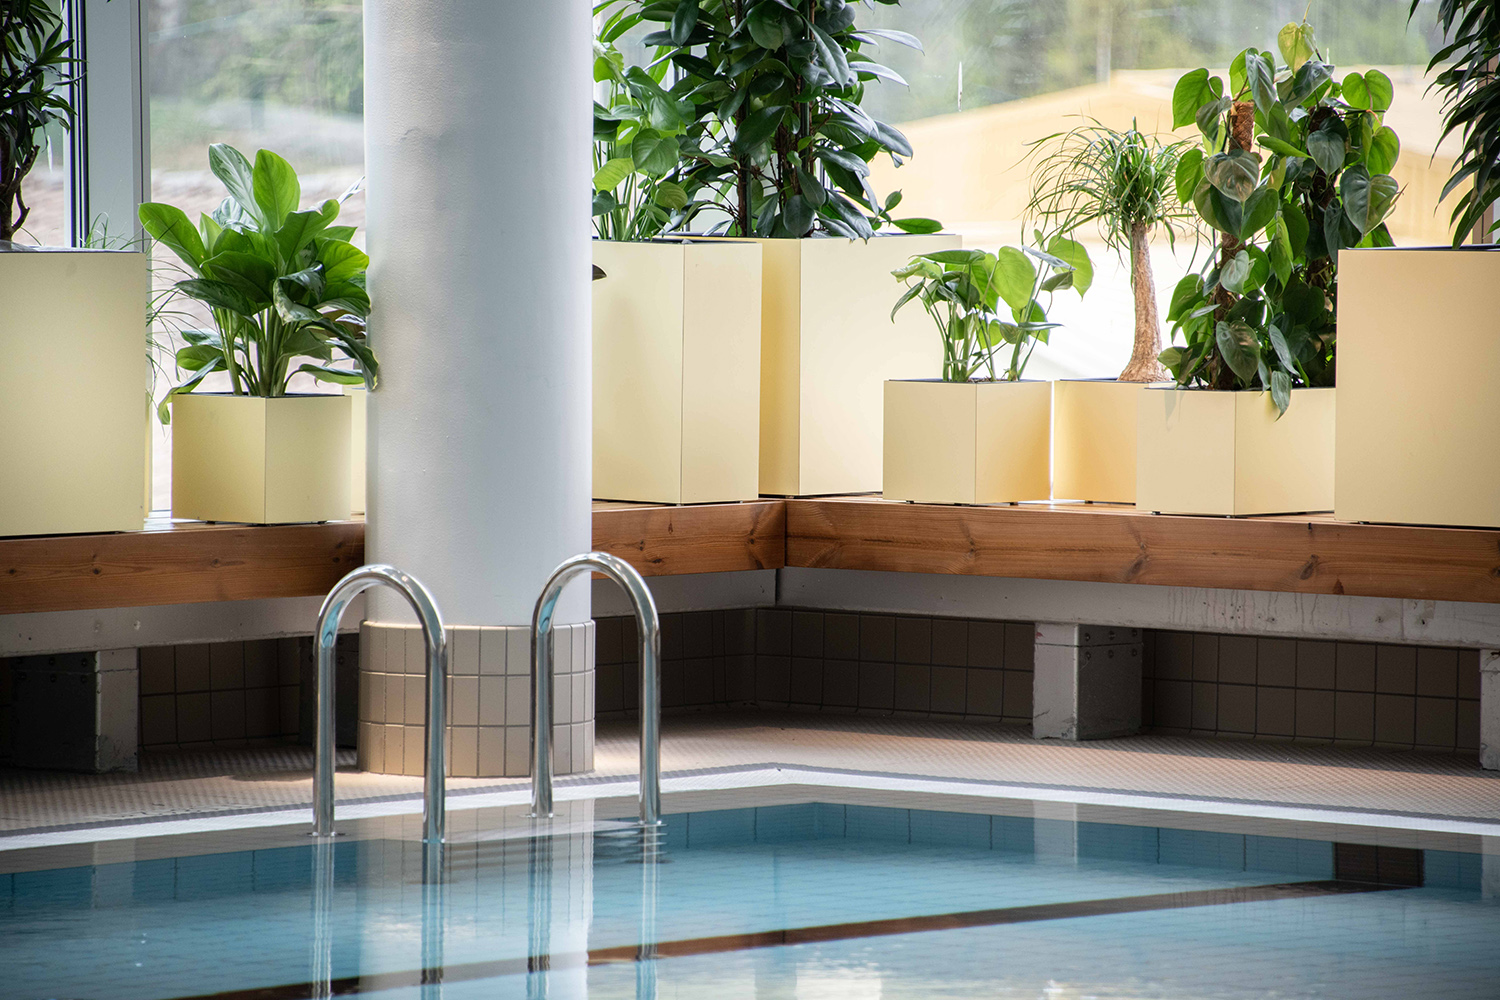 Parts of an indoor swimming pool with plants in the background.